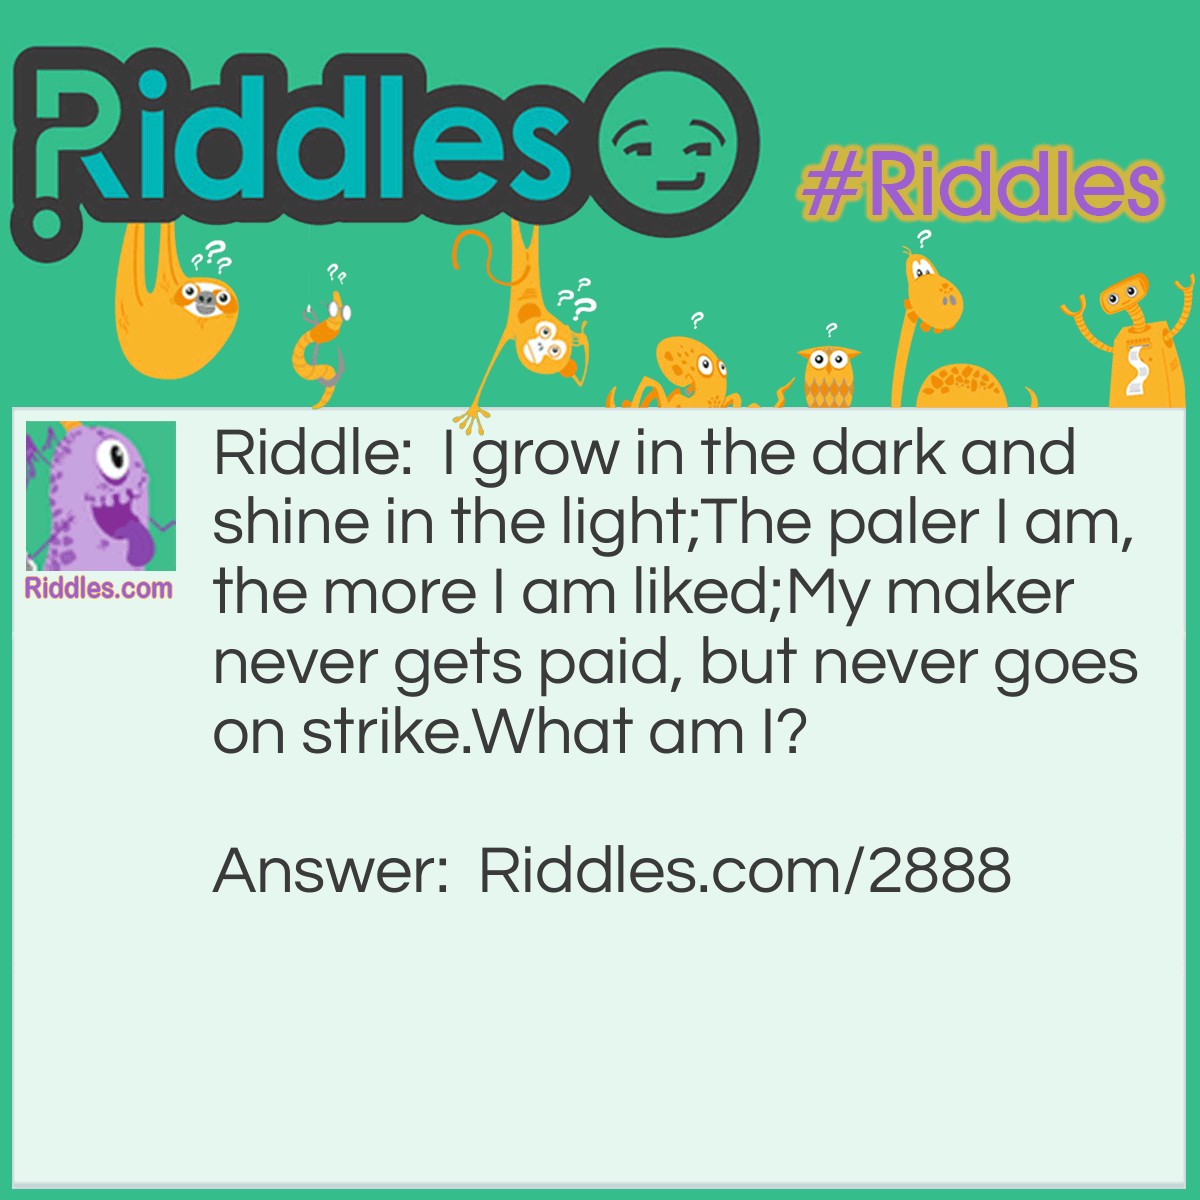 Riddle: I grow in the dark and shine in the light; 
The paler I am, the more I am liked; 
My maker never gets paid, but never goes on strike. 
What am I? Answer: A pearl.